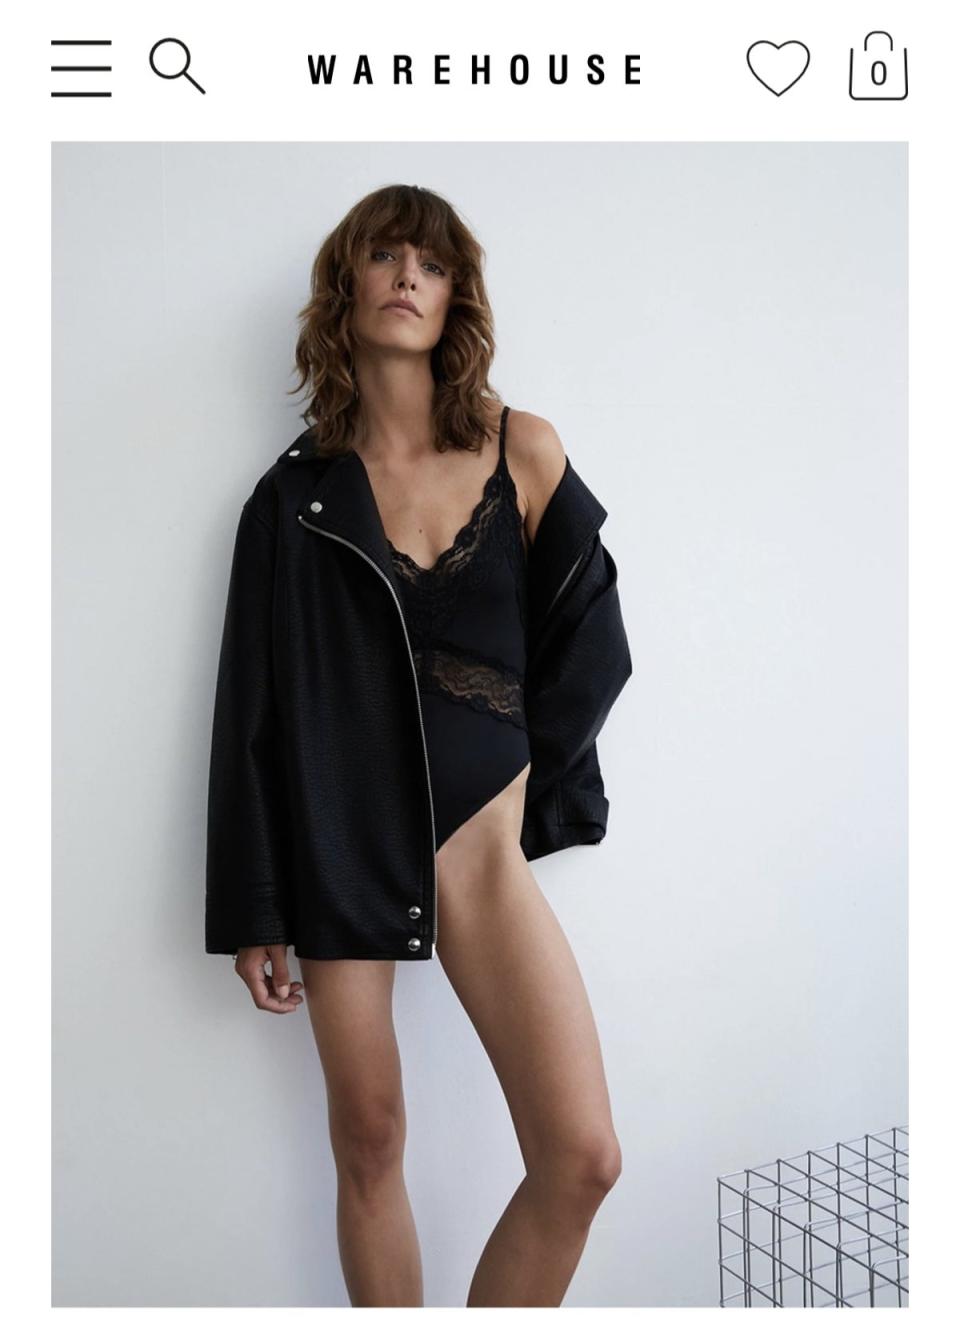 Warehouse advert featuring a model wearing an oversized jacket and bodysuit (ASA)